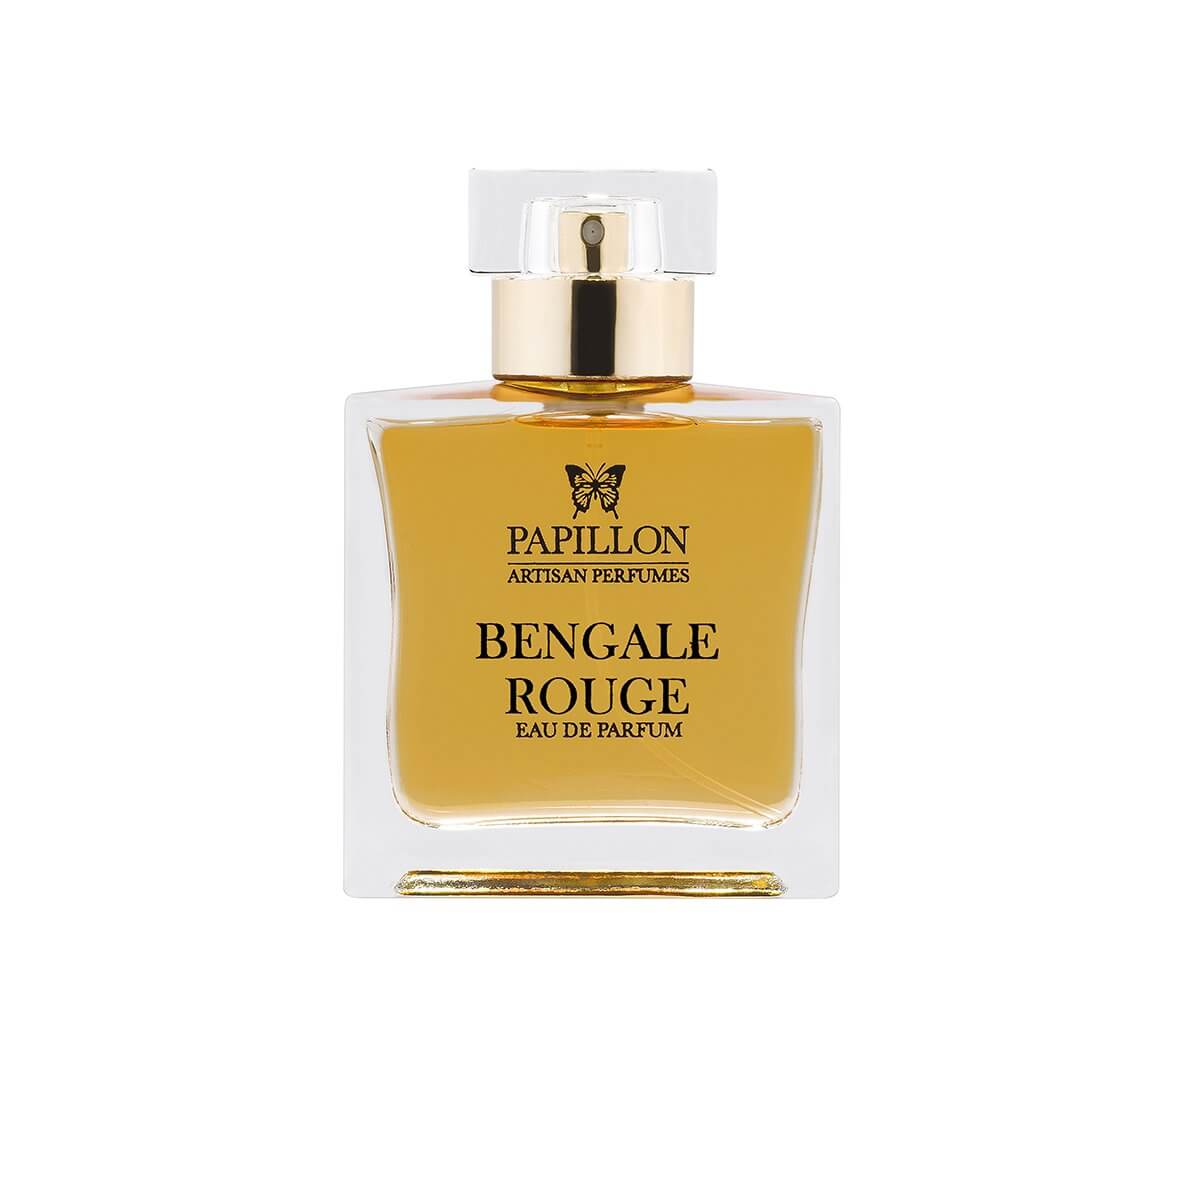 Bengale Rouge by Papillon at Indigo Perfumery